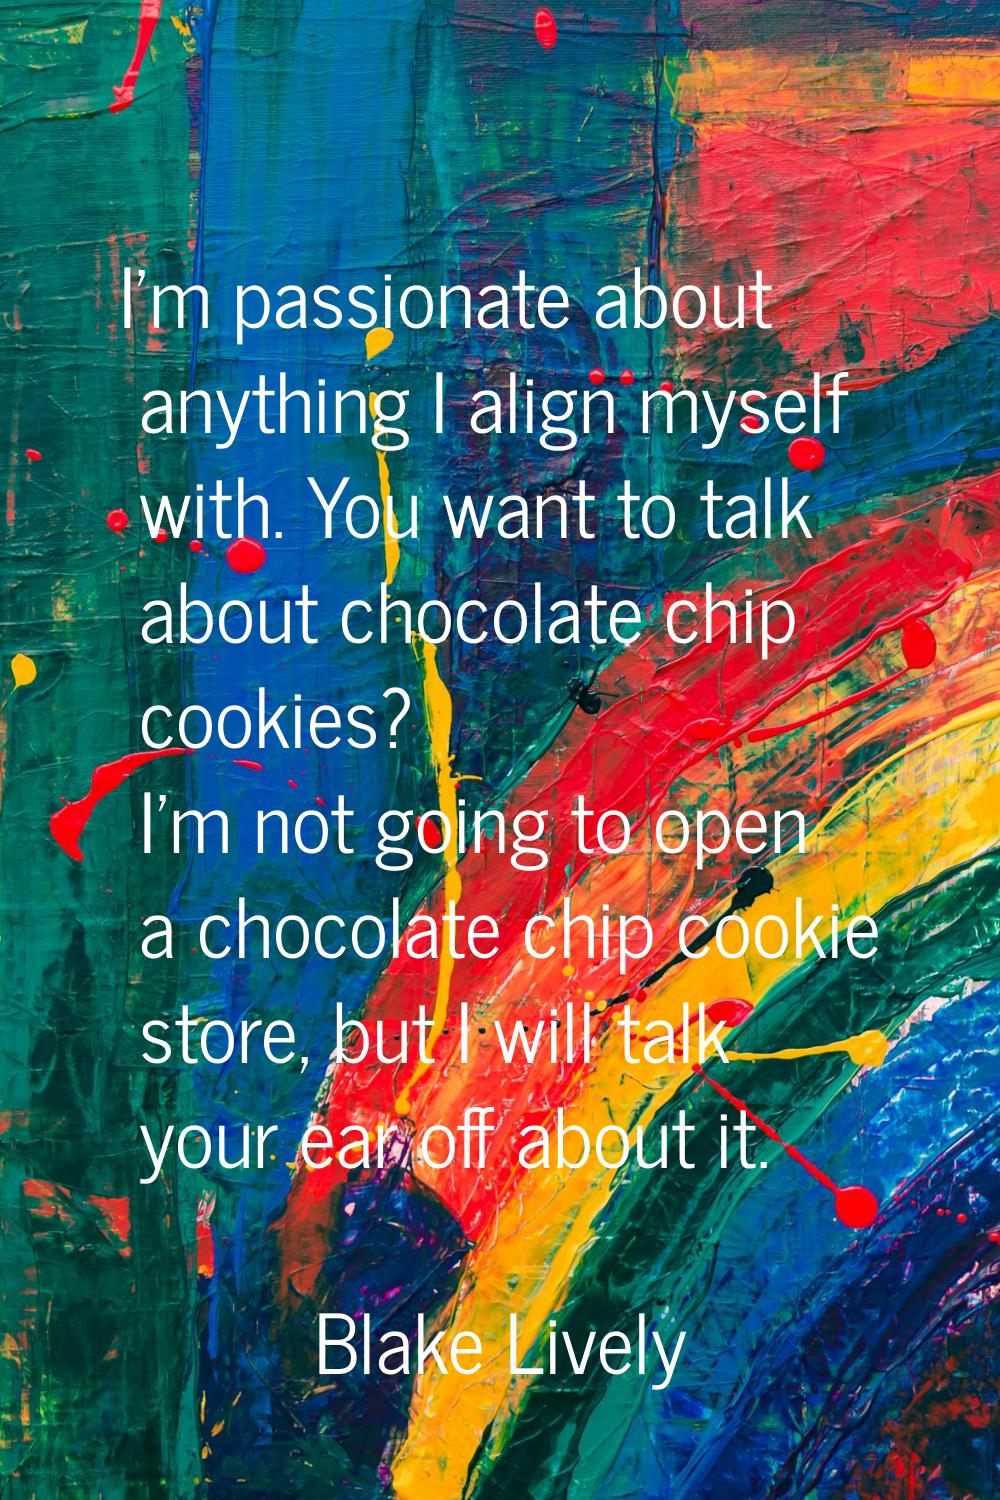 I'm passionate about anything I align myself with. You want to talk about chocolate chip cookies? I